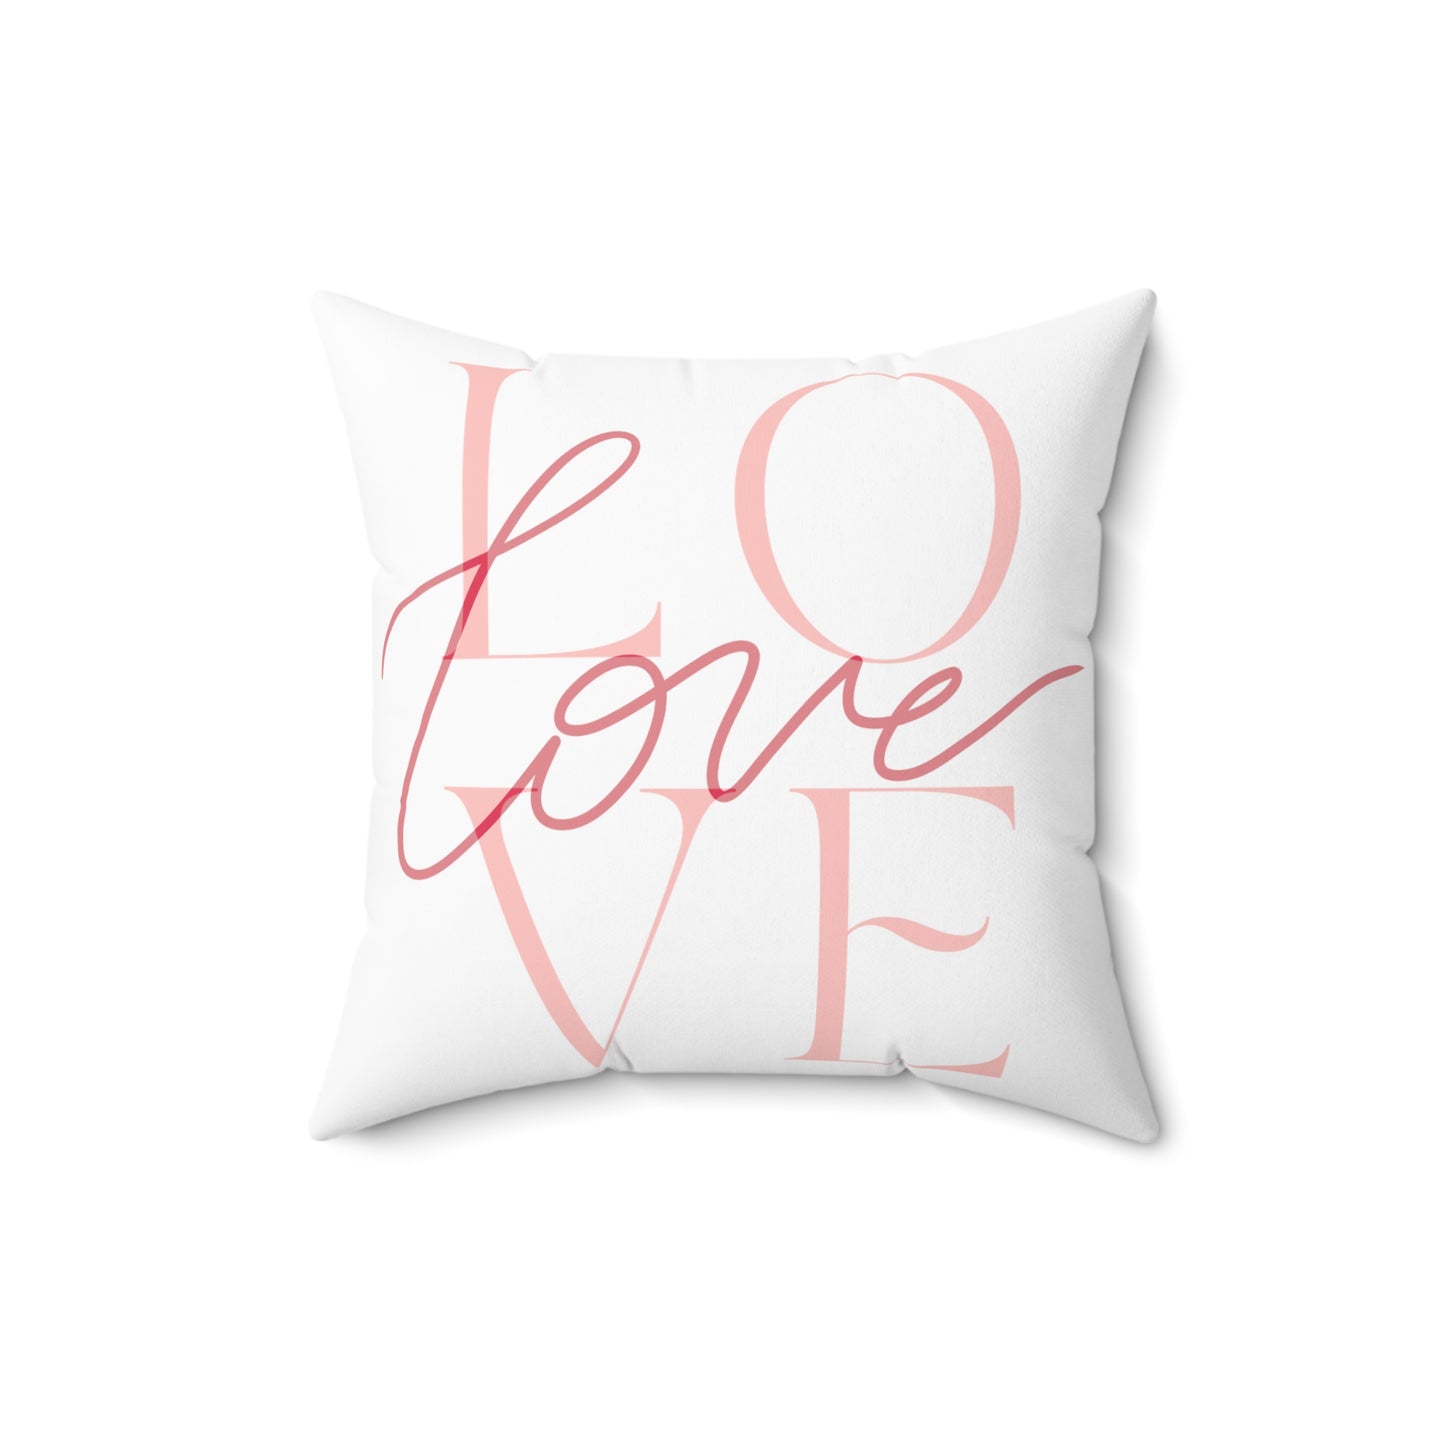 Love You Printed Spun Polyester Sqaure Pillow Case for Valentine